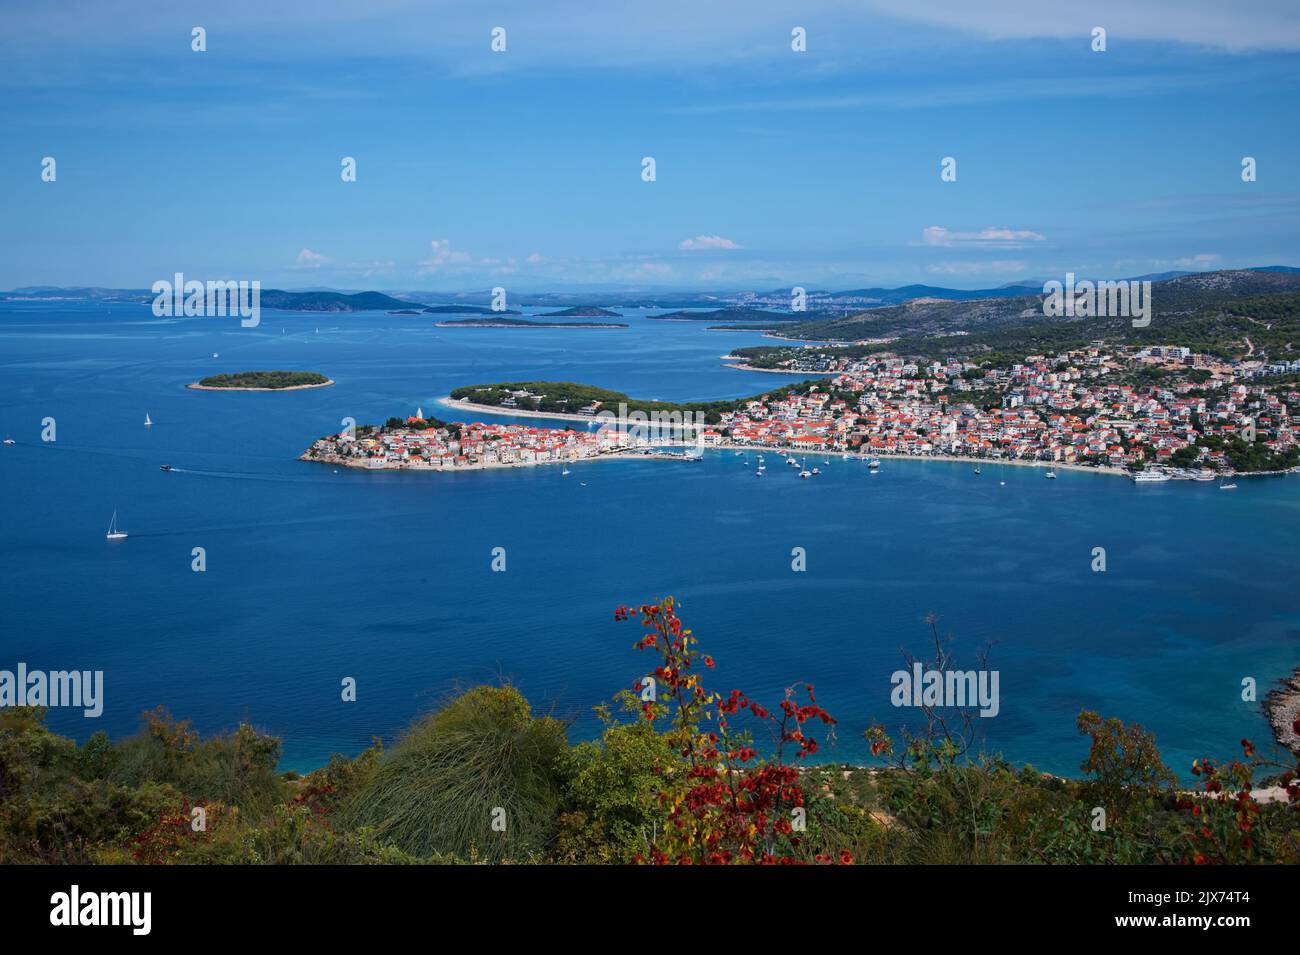 Mediterranean seascape with lot of islands and historic town on peninsula Stock Photo